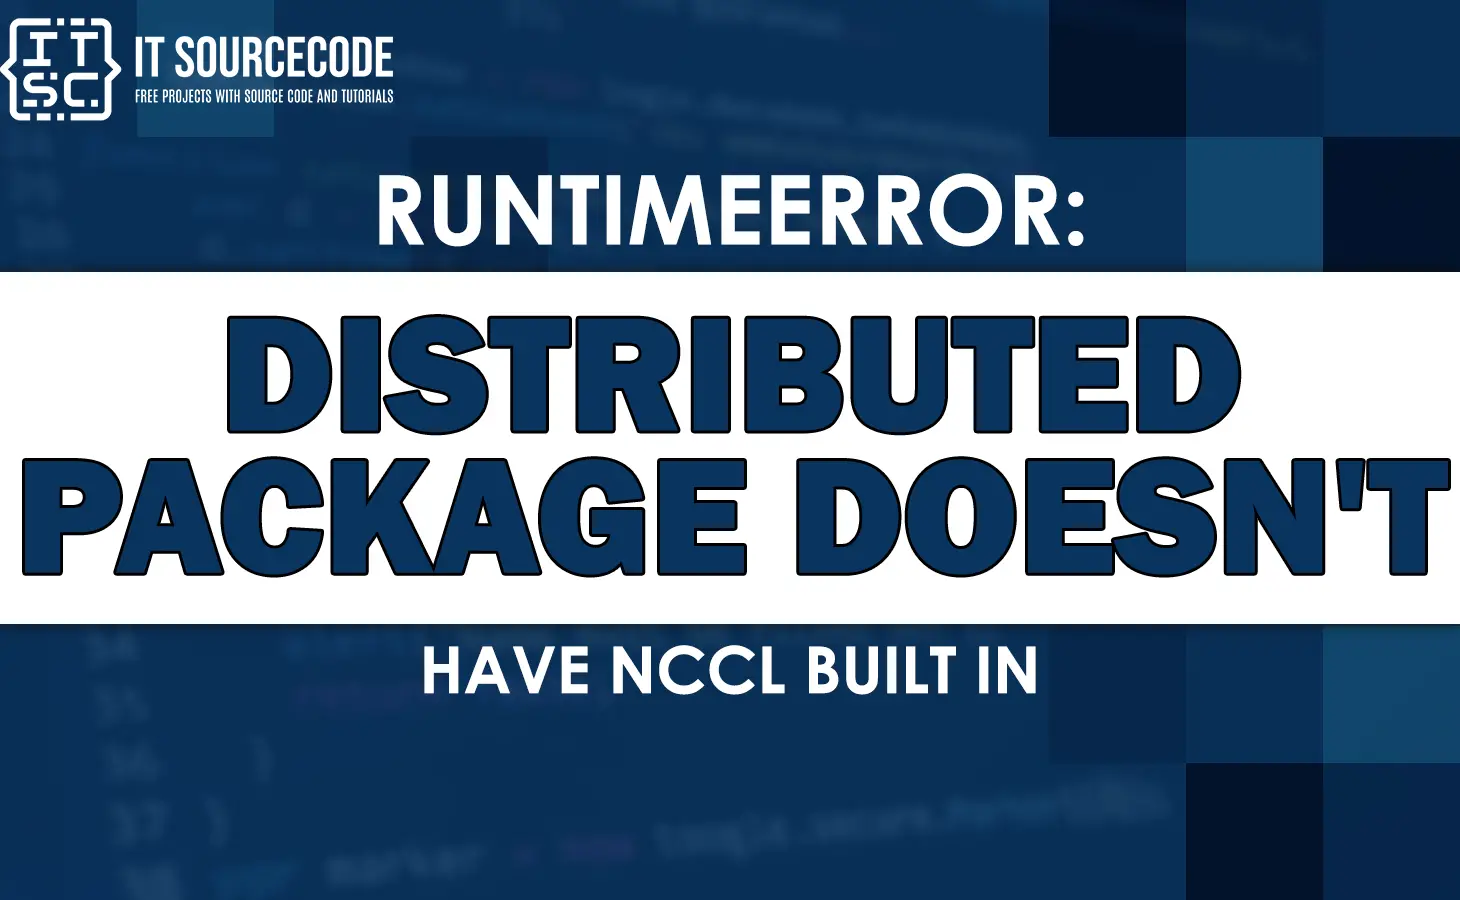 Runtimeerror distributed package doesn't have nccl built in